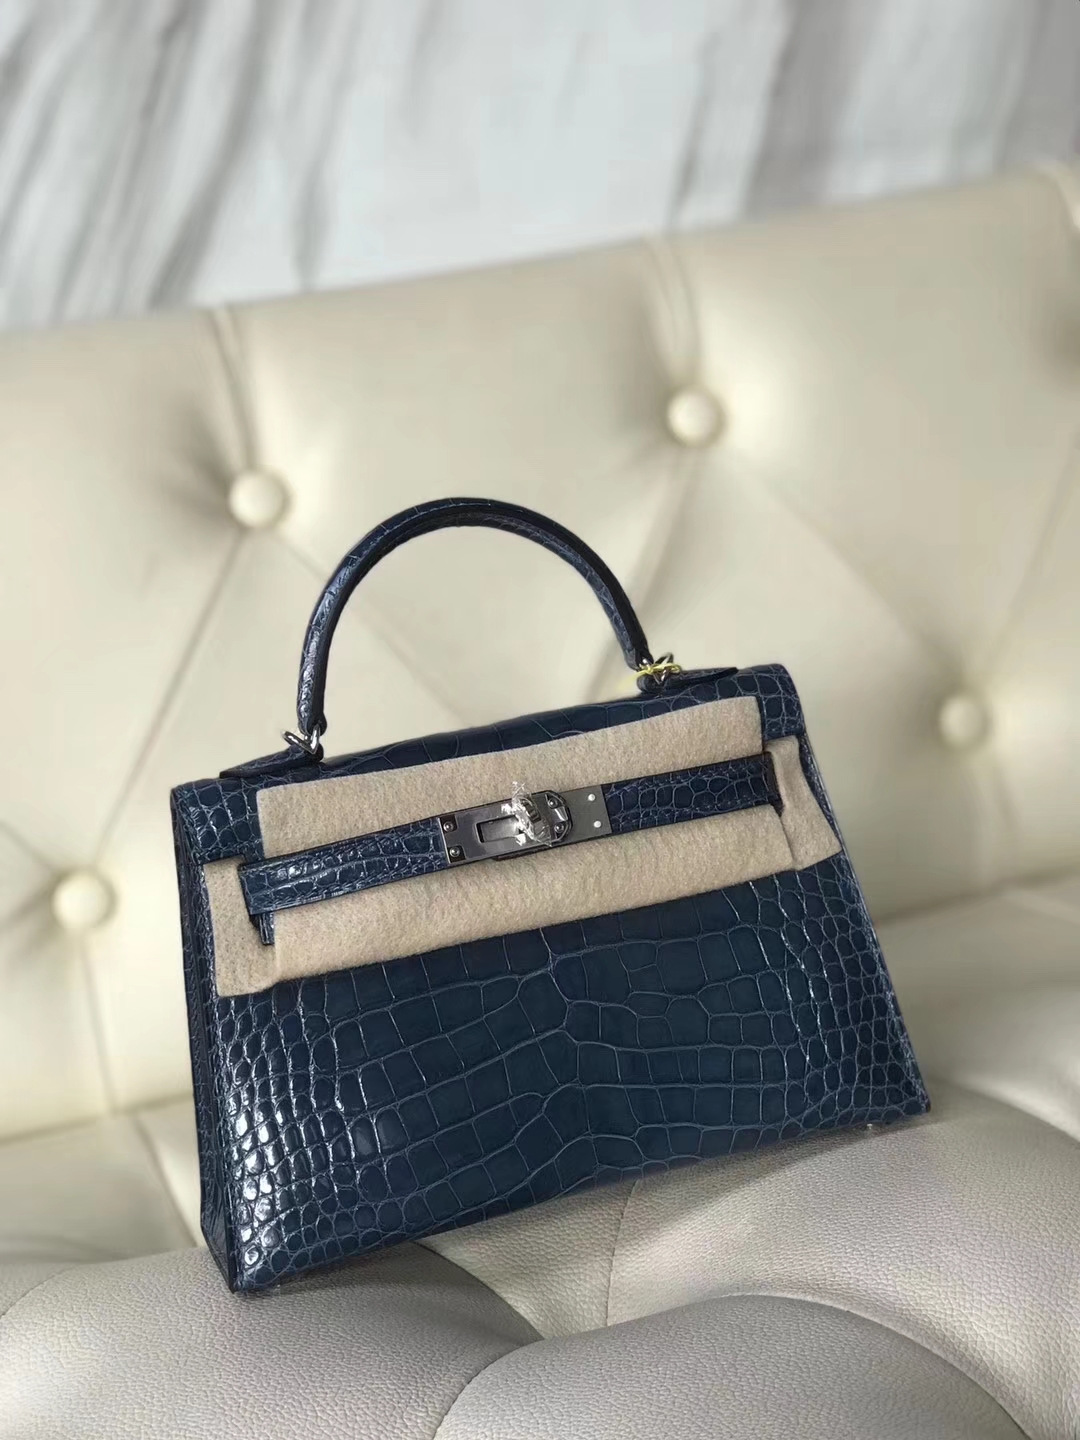 New Arrival Hermes Shiny Crocodile Minikelly-2 Evening Bag in 7N Blue Tempete